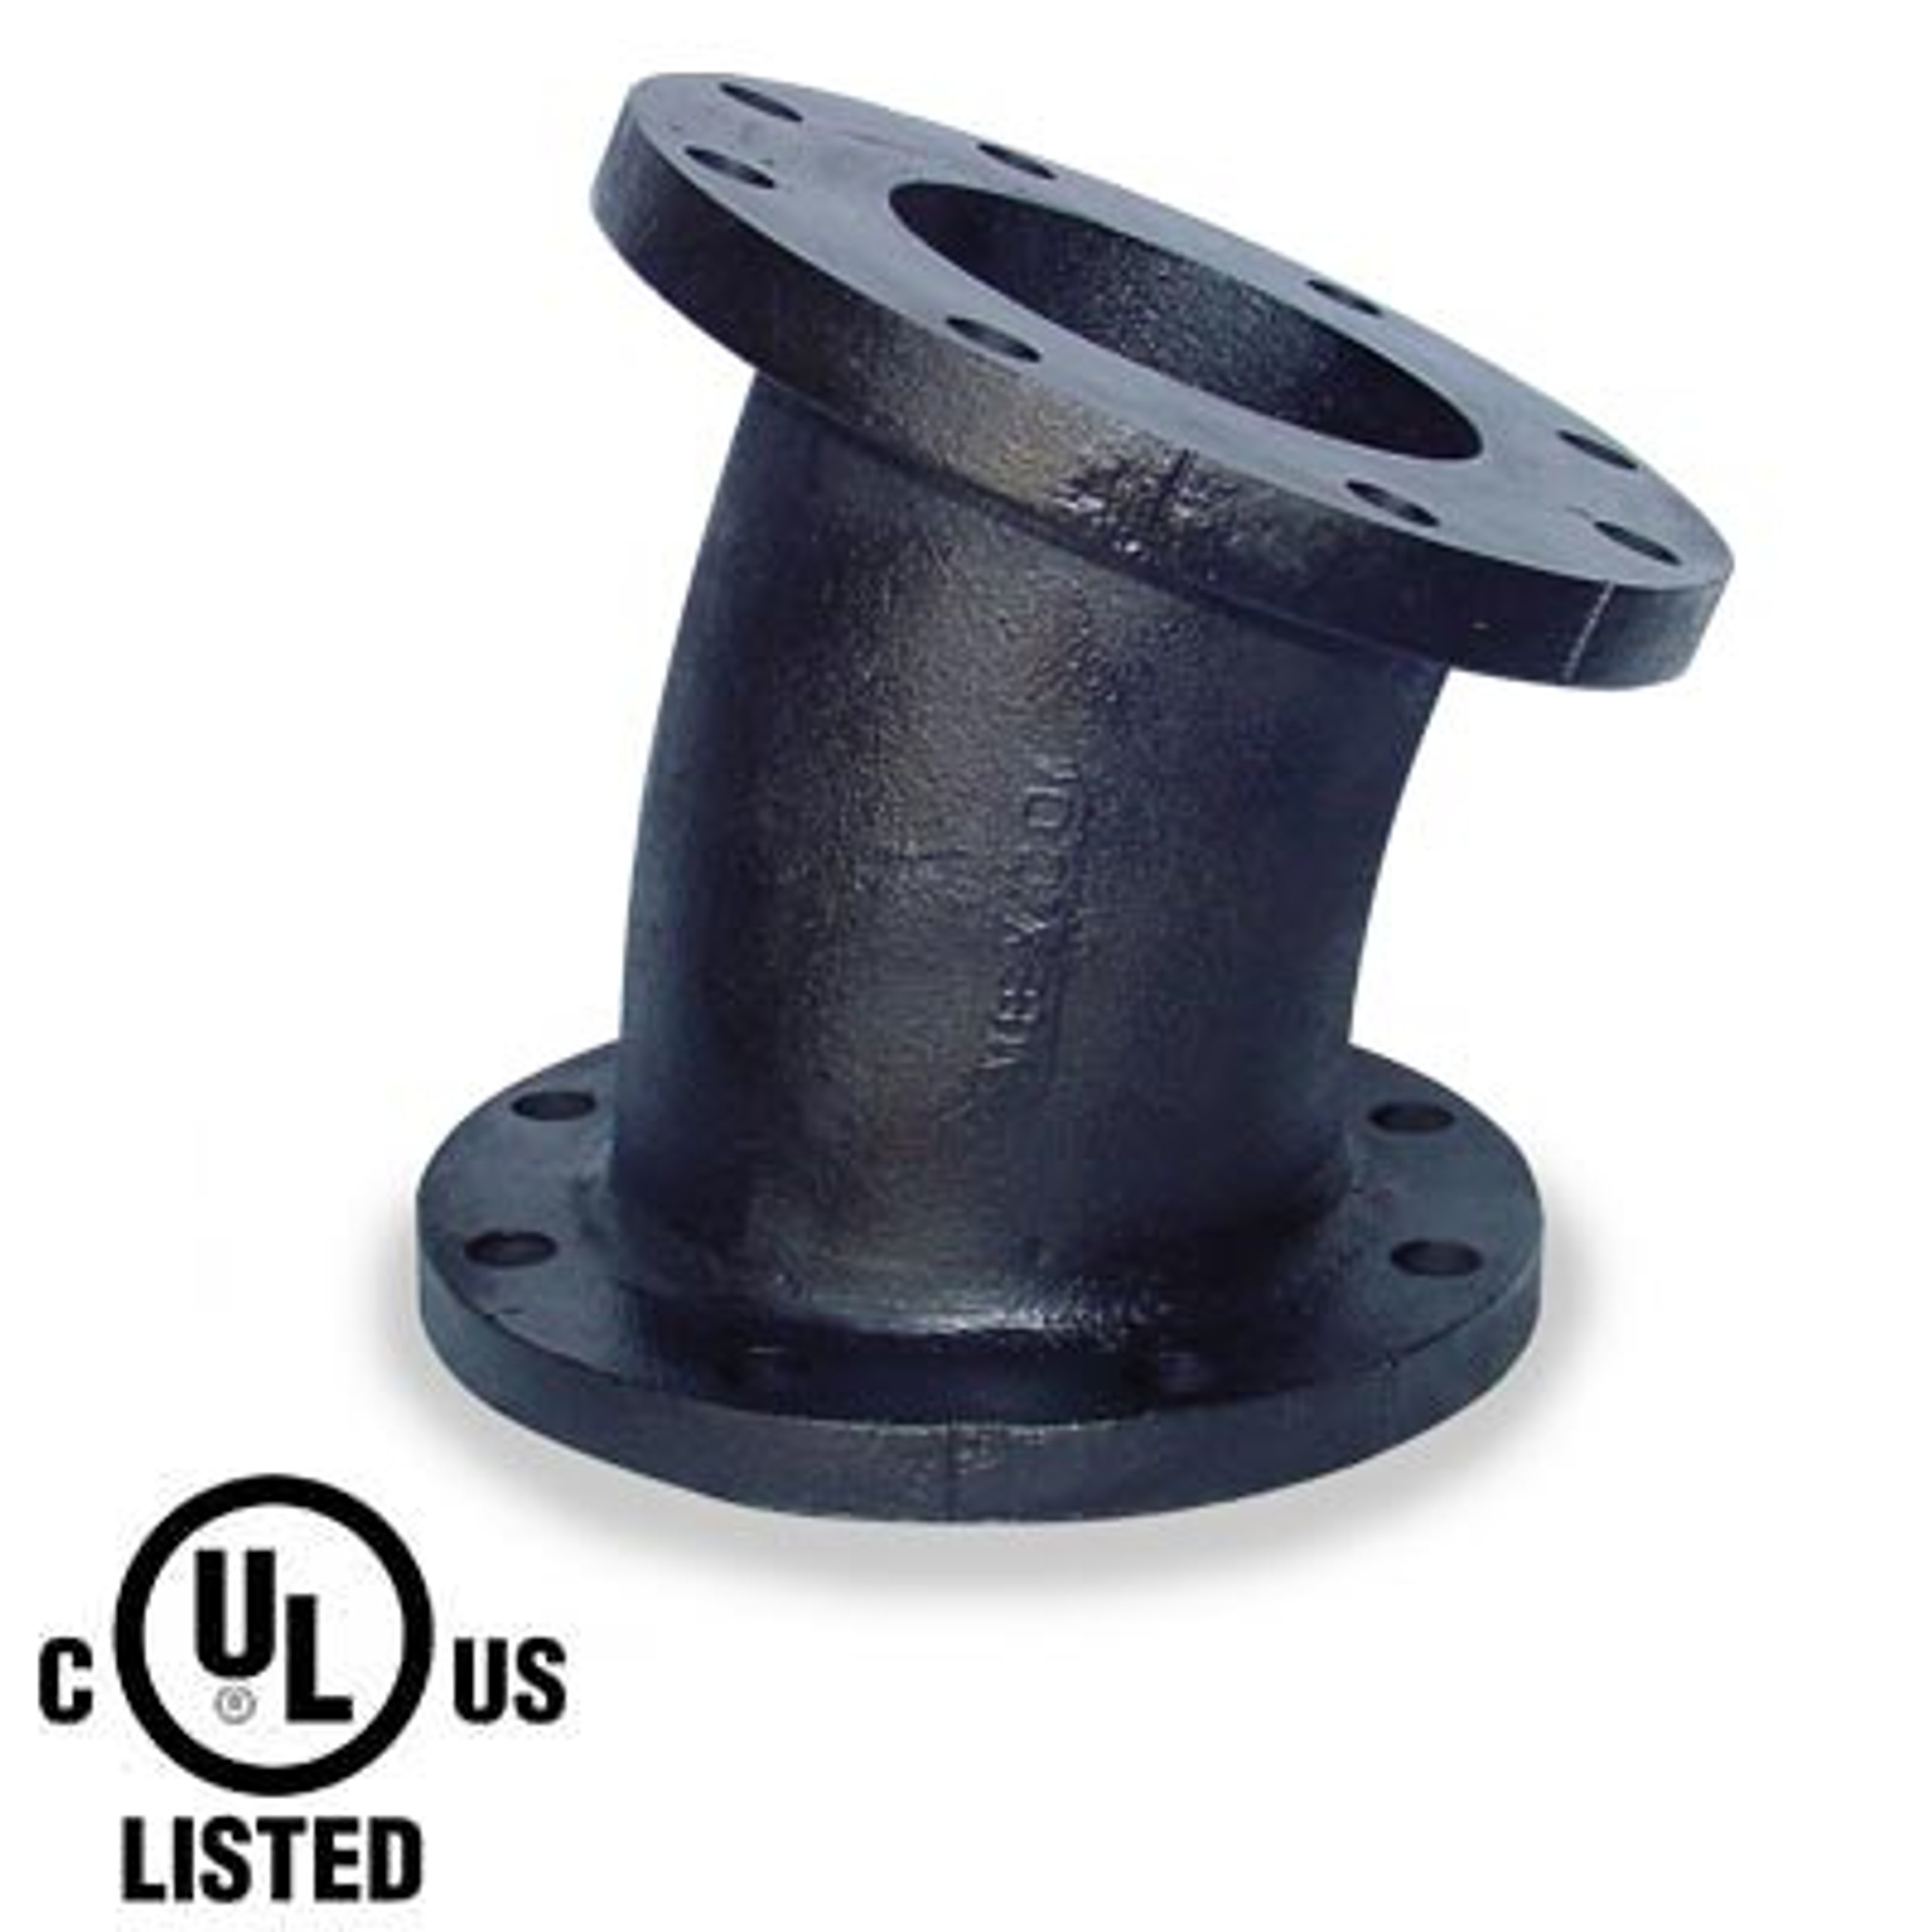 150 Ductile Iron Flanged Pipe Fittings 12 90 Degree Elbow 